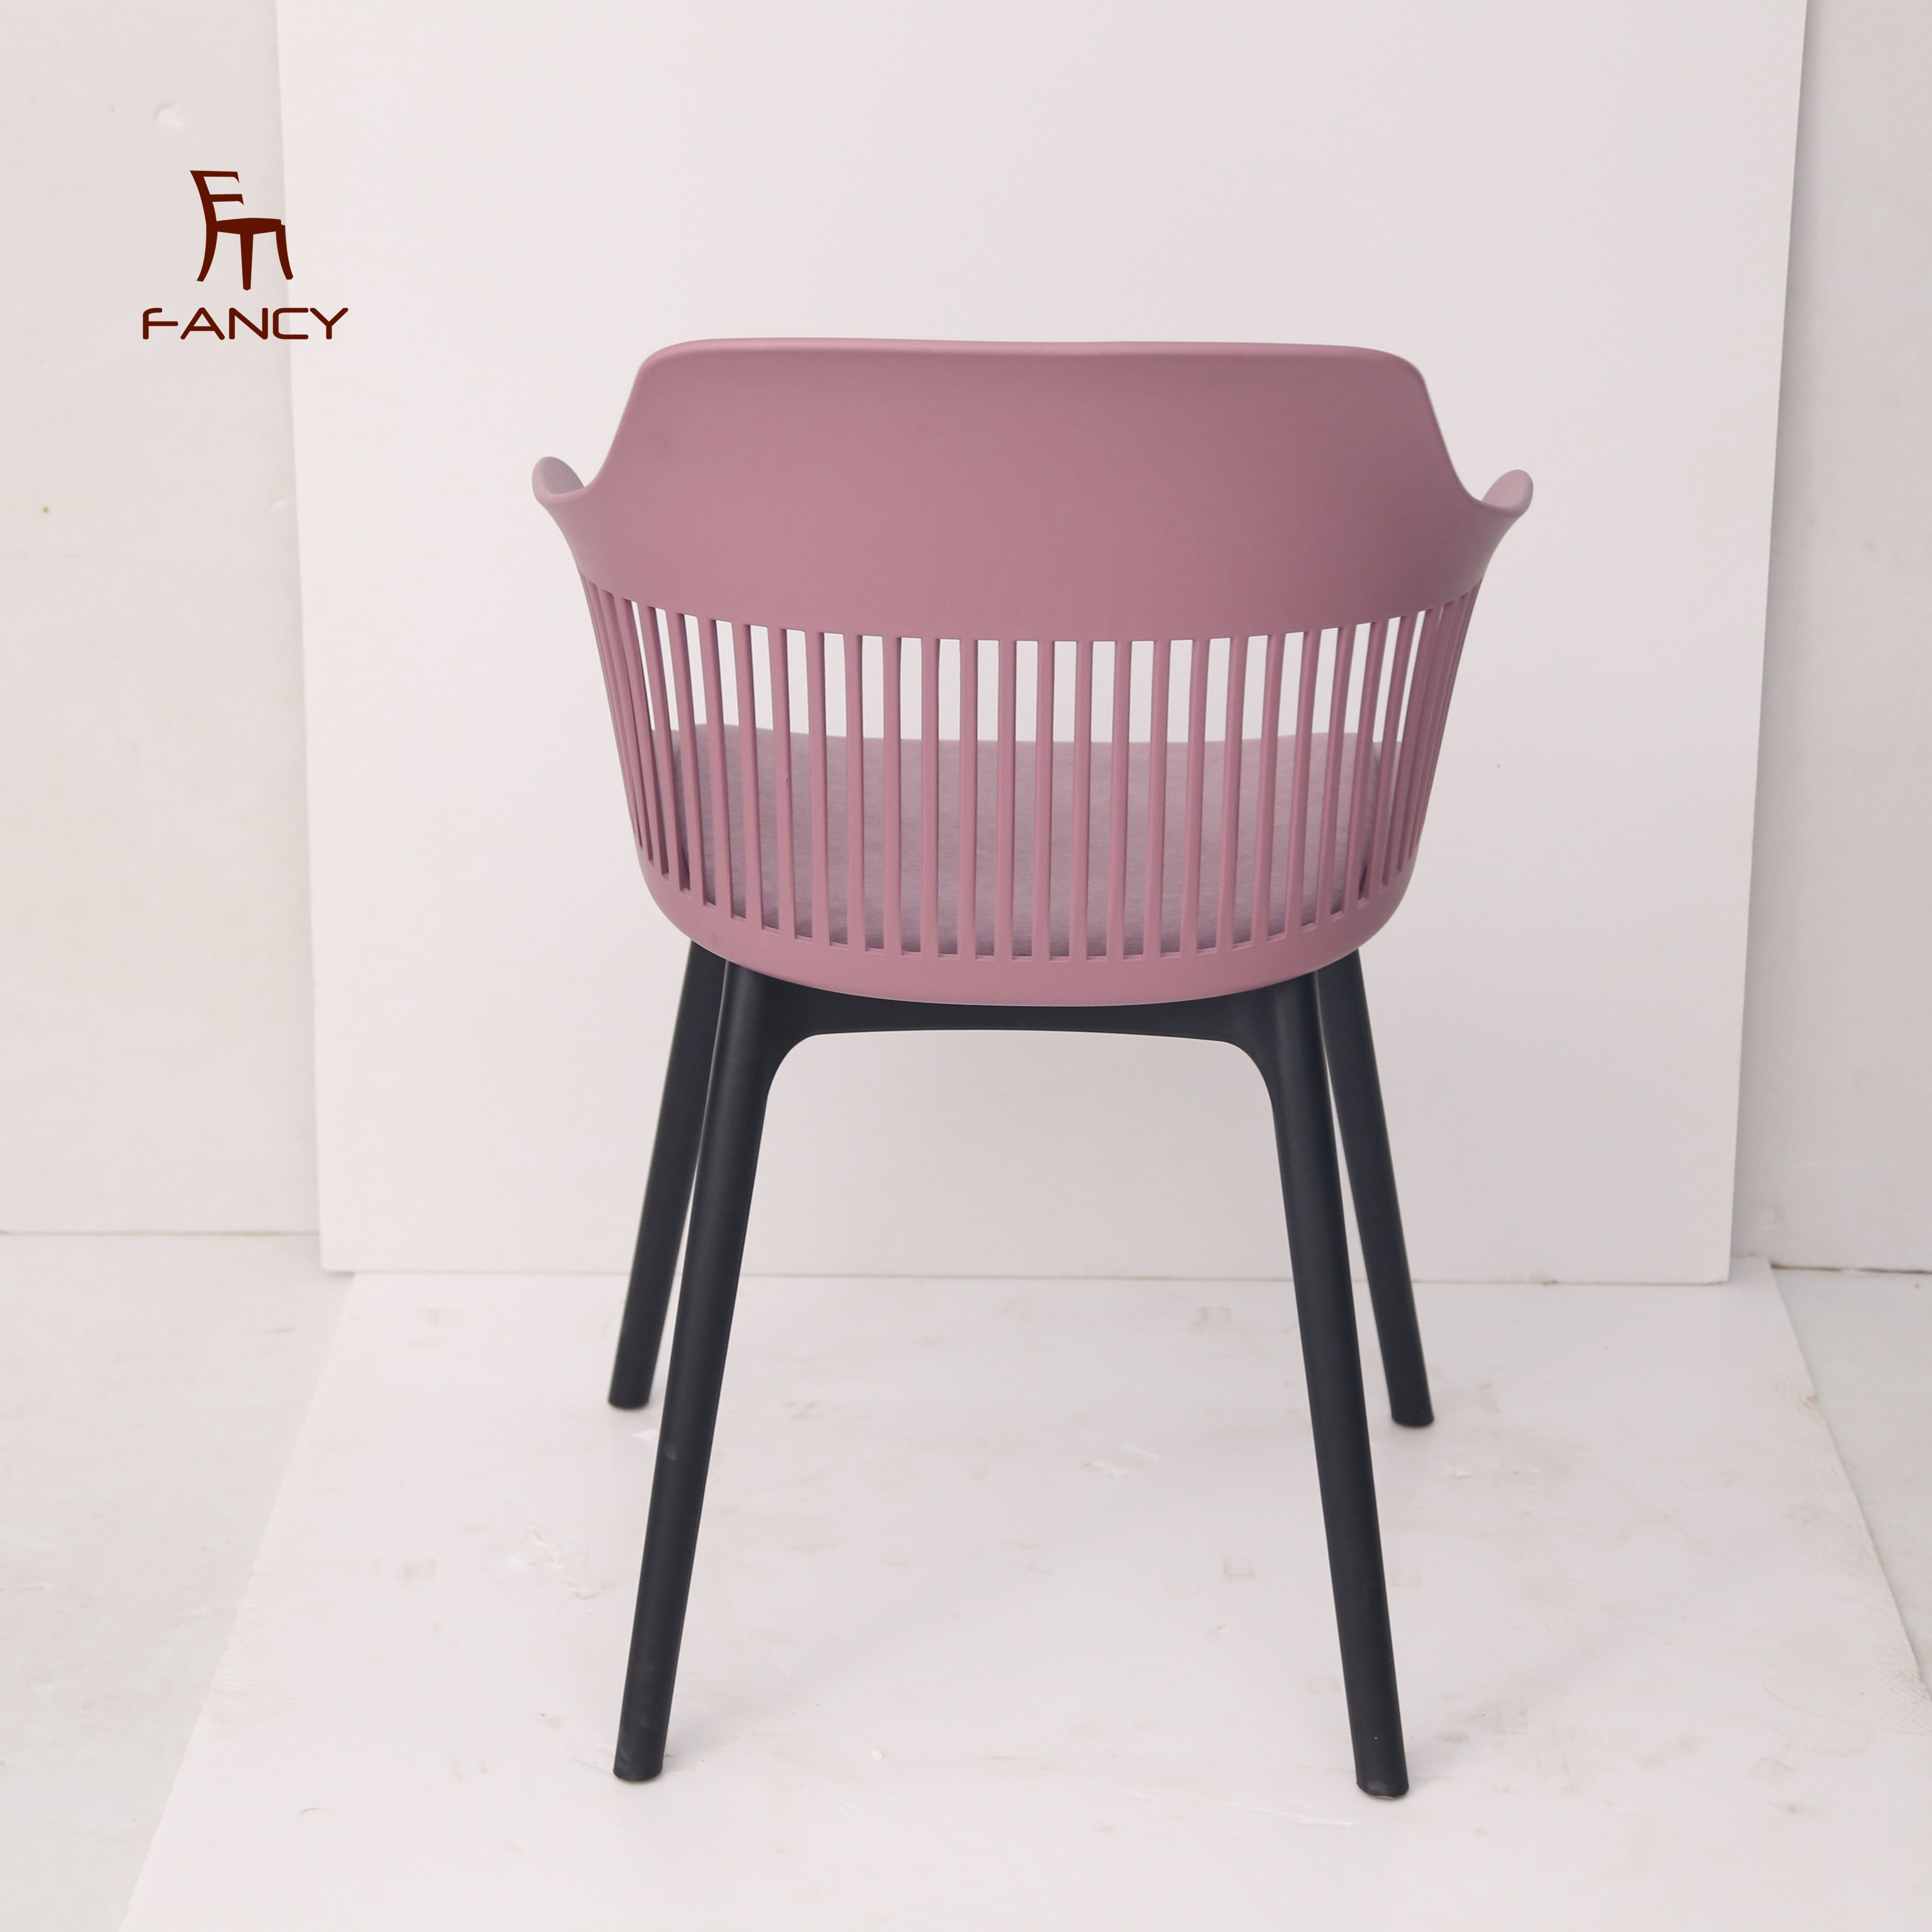 2020 fashion dining room cheap plastic chair with metal leg